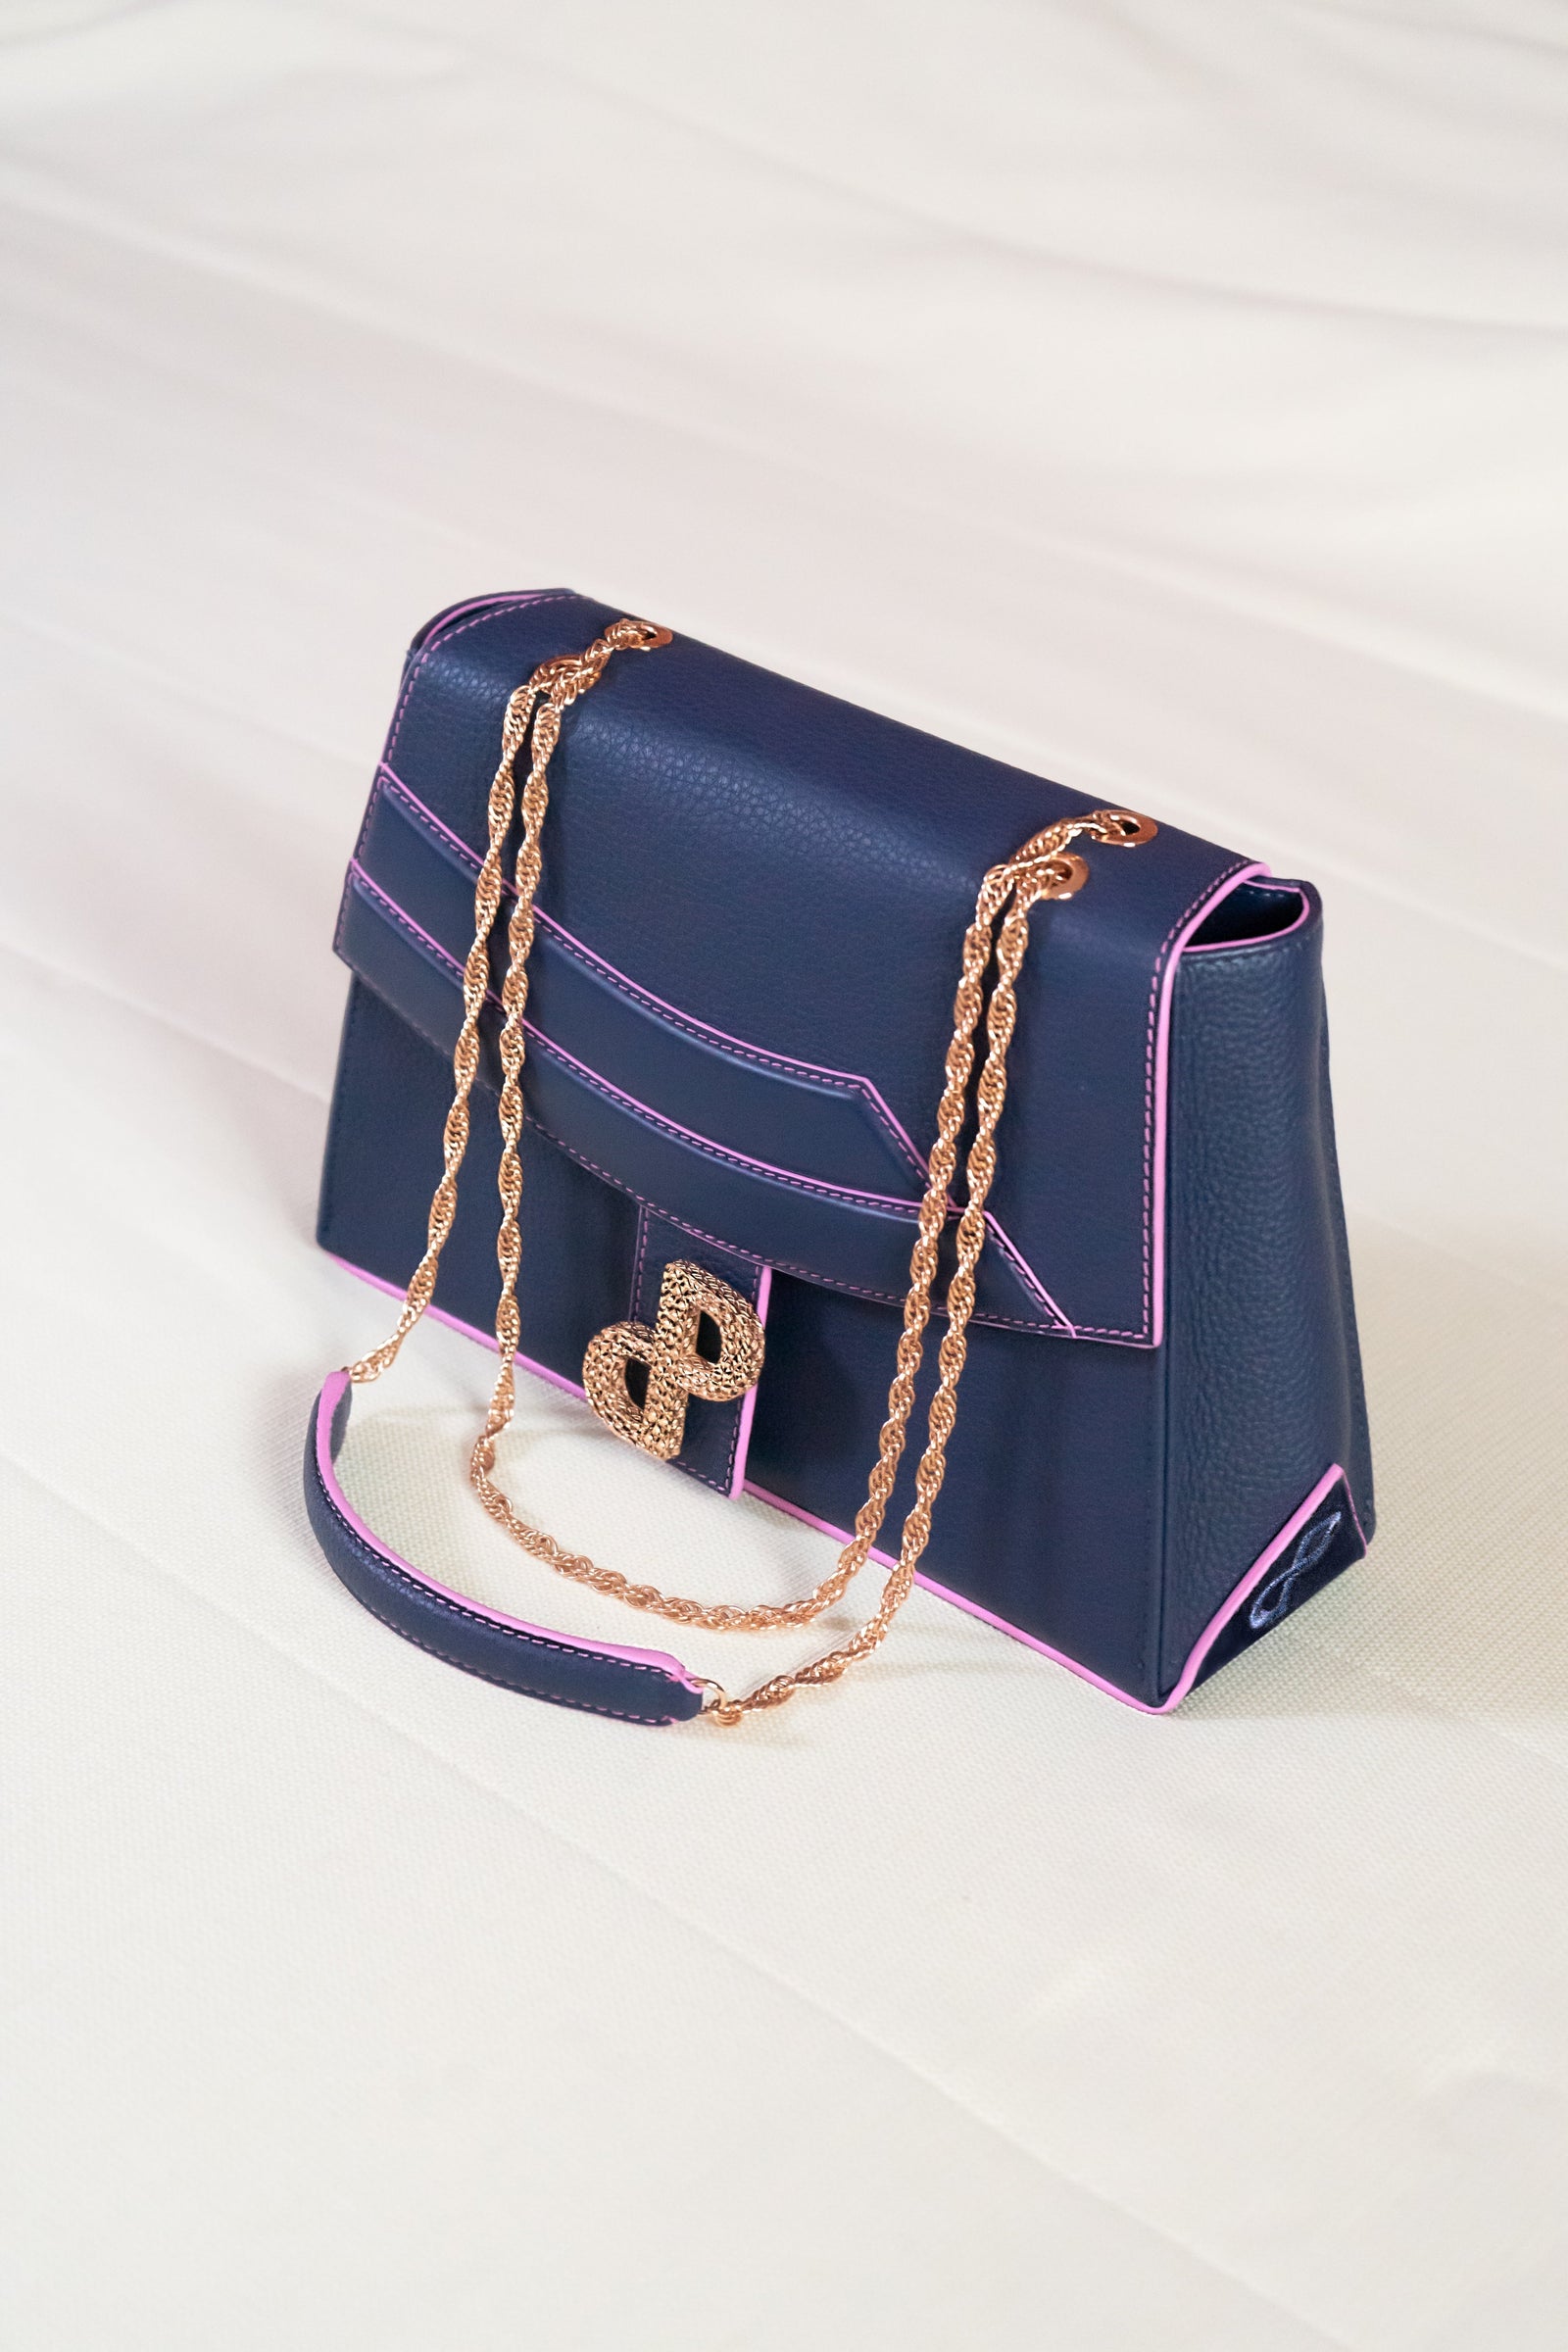 LIVIA luxury messenger bag in 3D hardware MADE IN FLORENCE